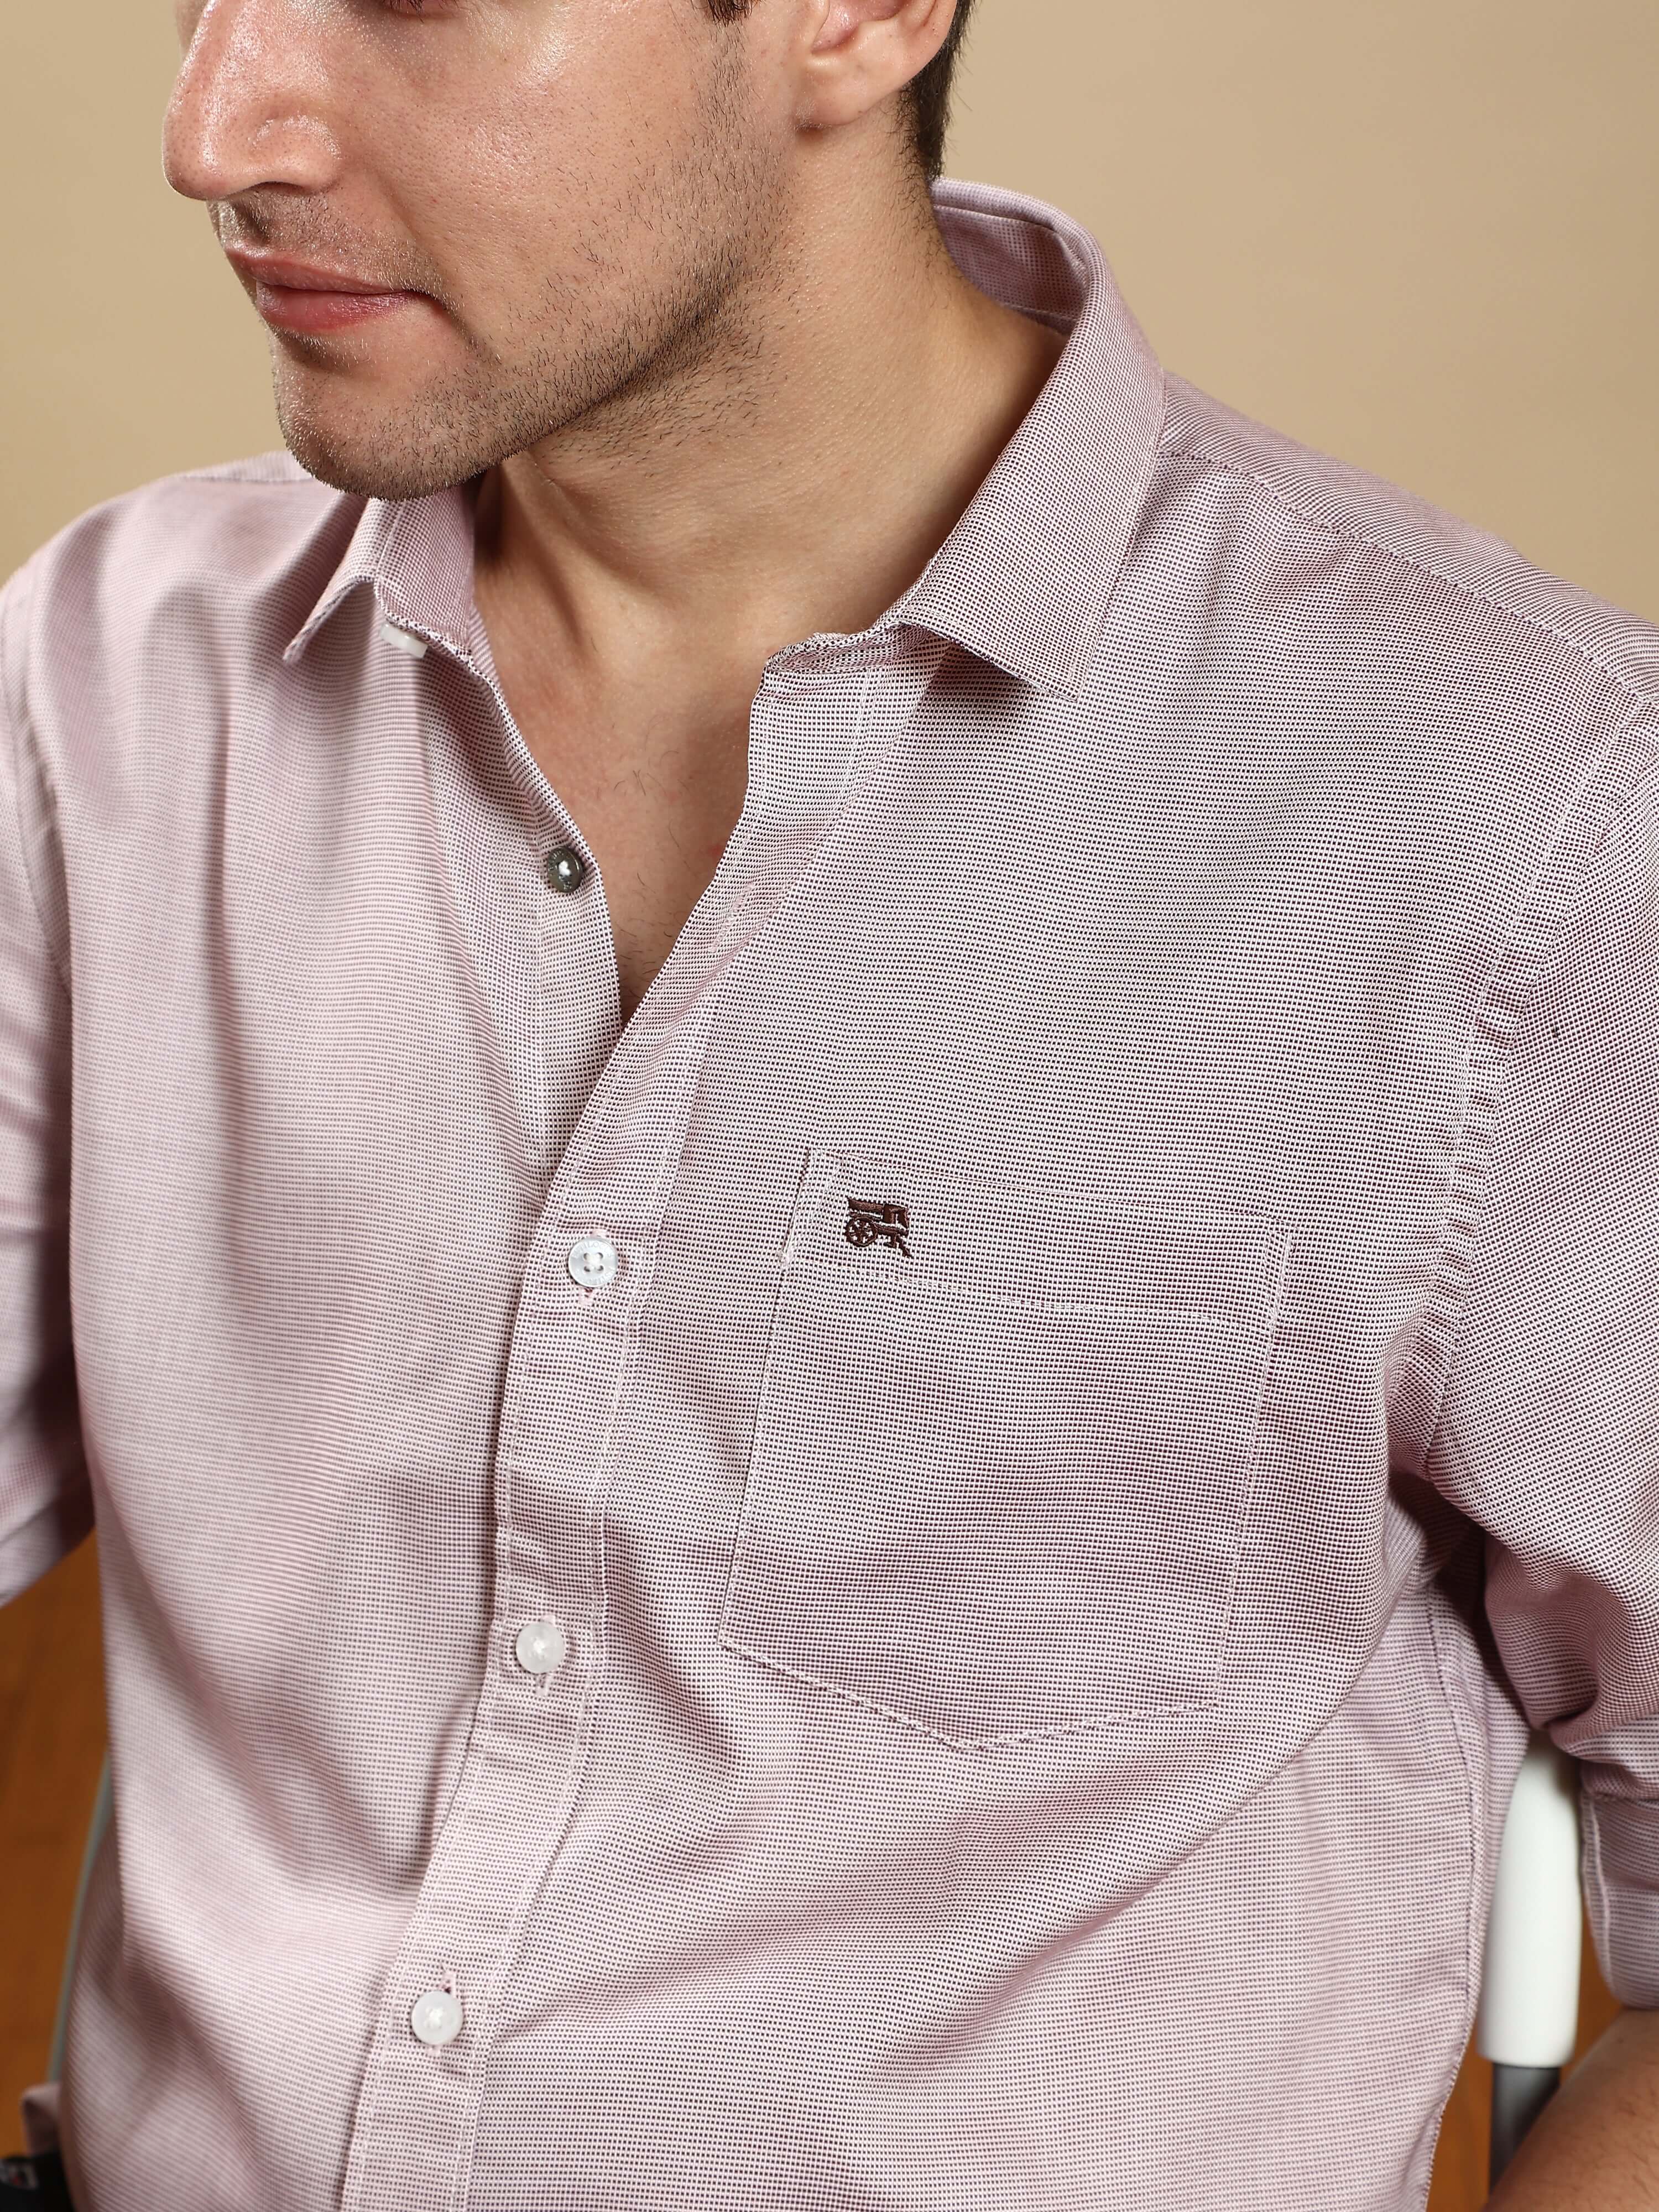 Red/White Solid Casual Full Sleeves Shirt_ ESTILOCUS CASUAL SHIRT_ estilocus